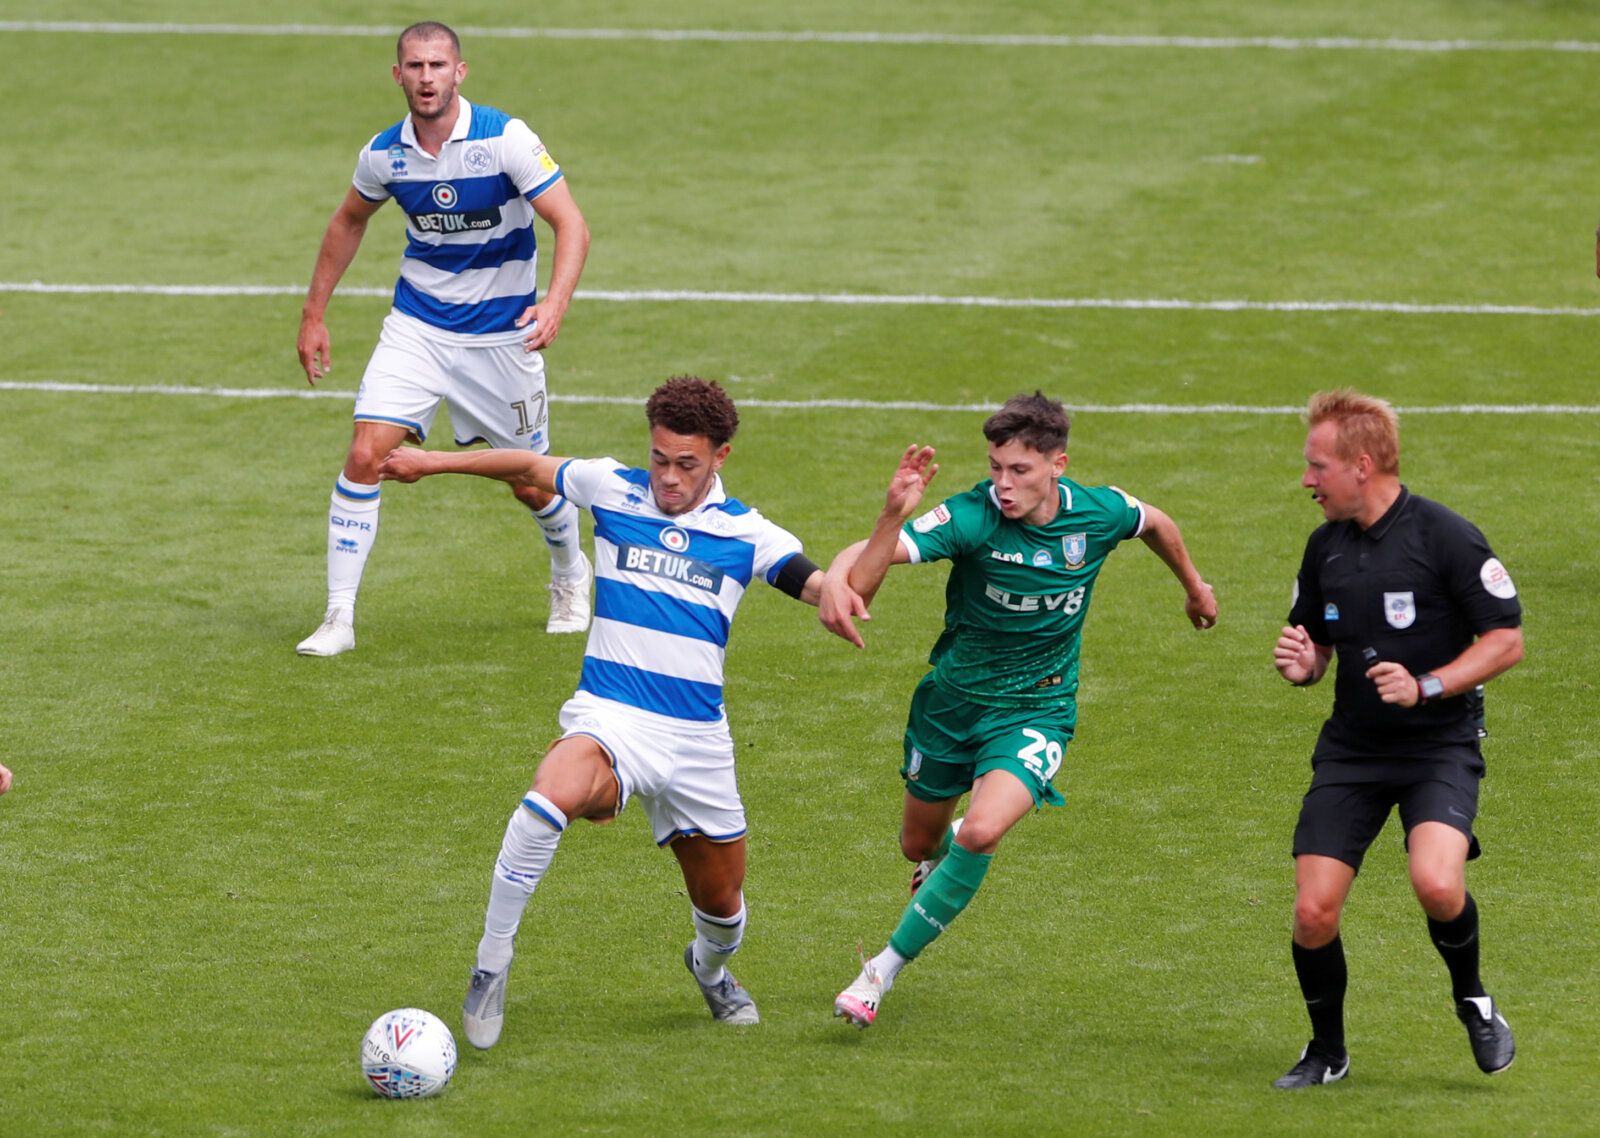 Soccer Football - Championship - Queens Park Rangers v Sheffield Wednesday - Loftus Park, London, Britain - July 11, 2020   Queens Park Rangers' Luke Amos in action with Sheffield Wednesday's Alex Hunt, as play resumes behind closed doors following the outbreak of the coronavirus disease (COVID-19)   Action Images/Andrew Couldridge    EDITORIAL USE ONLY. No use with unauthorized audio, video, data, fixture lists, club/league logos or "live" services. Online in-match use limited to 75 images, no 